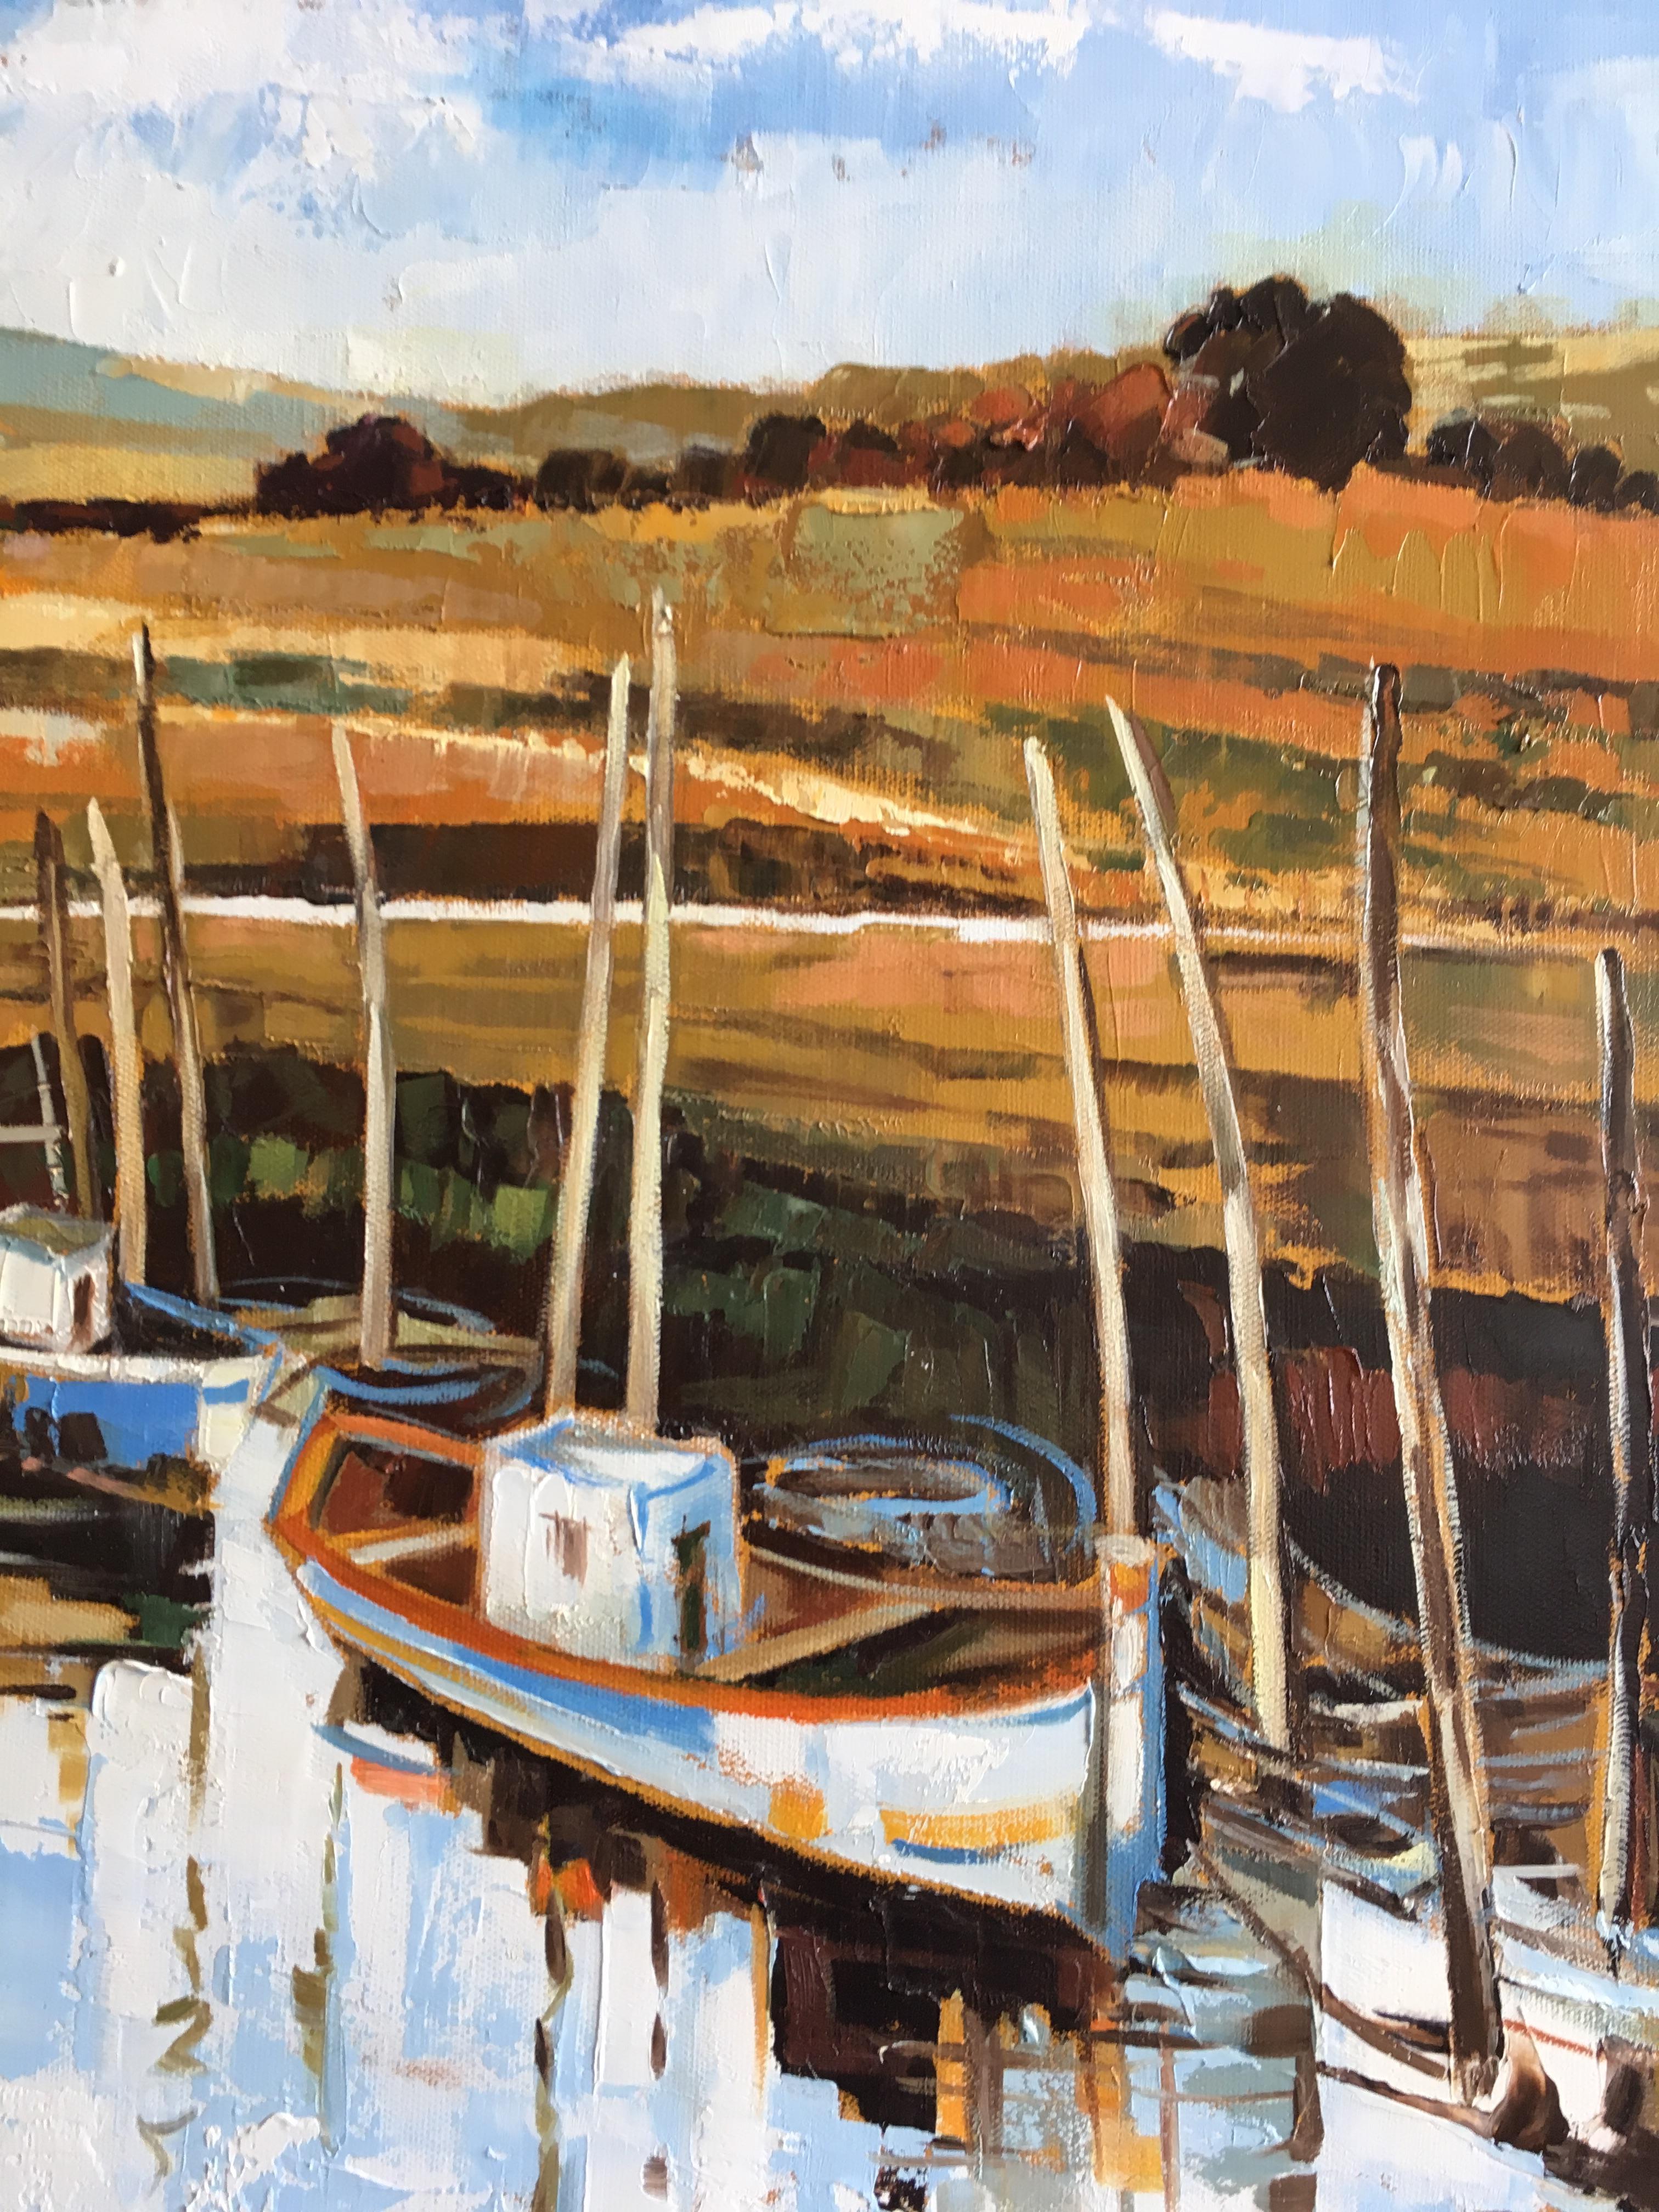 The canal, oil on canvas by French artist Jori Duran
Dimension cm: 60 H x 73 W x 2 D

Jori Duran, is a capital artist.
She has been working as a teacher, book illustrator for the luxury editions “Carrés d'Art” (Paris) and as a restorer of important